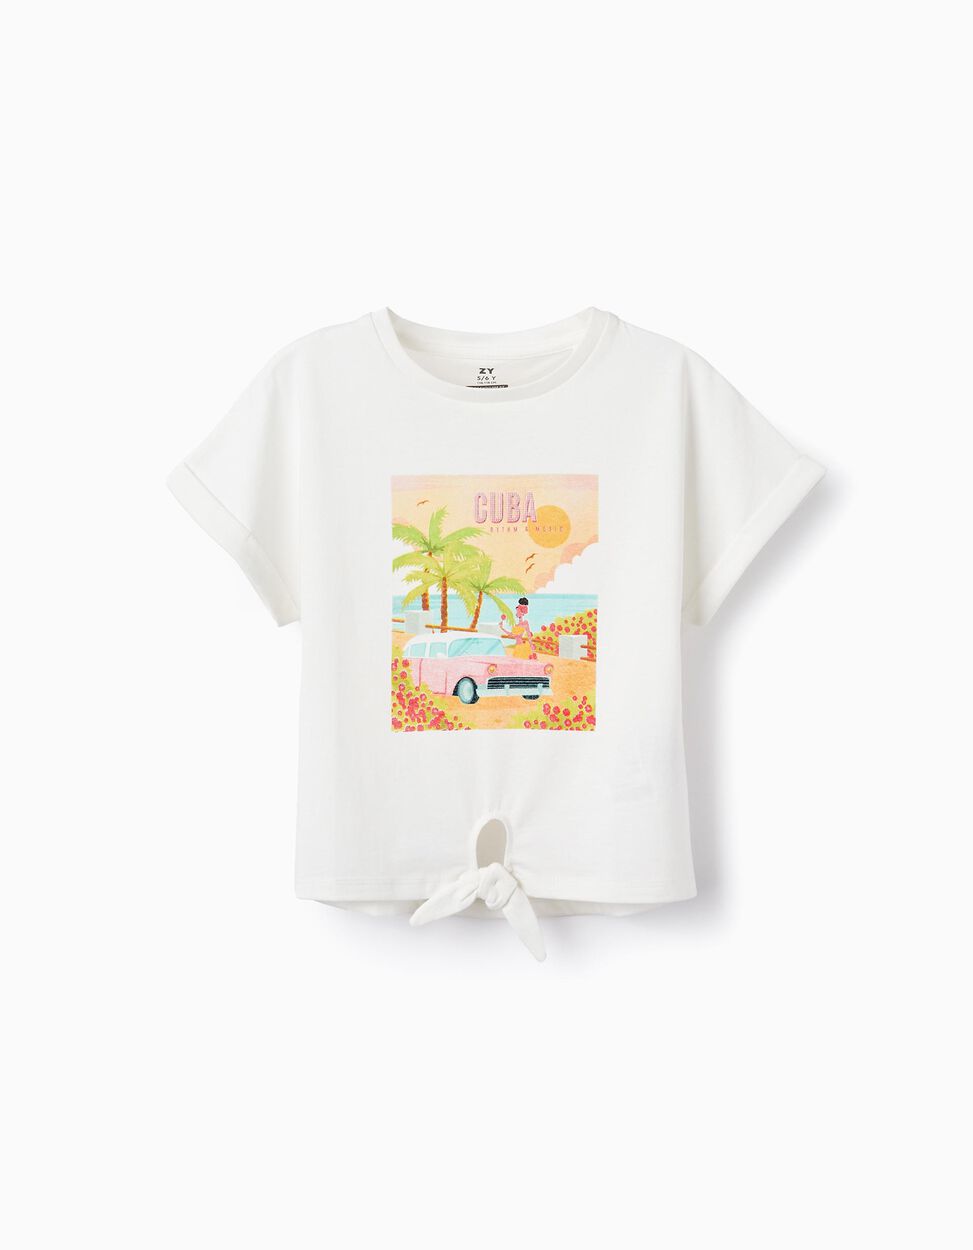 Buy Online Cotton T-shirt with Knot for Girls 'Cuba', White